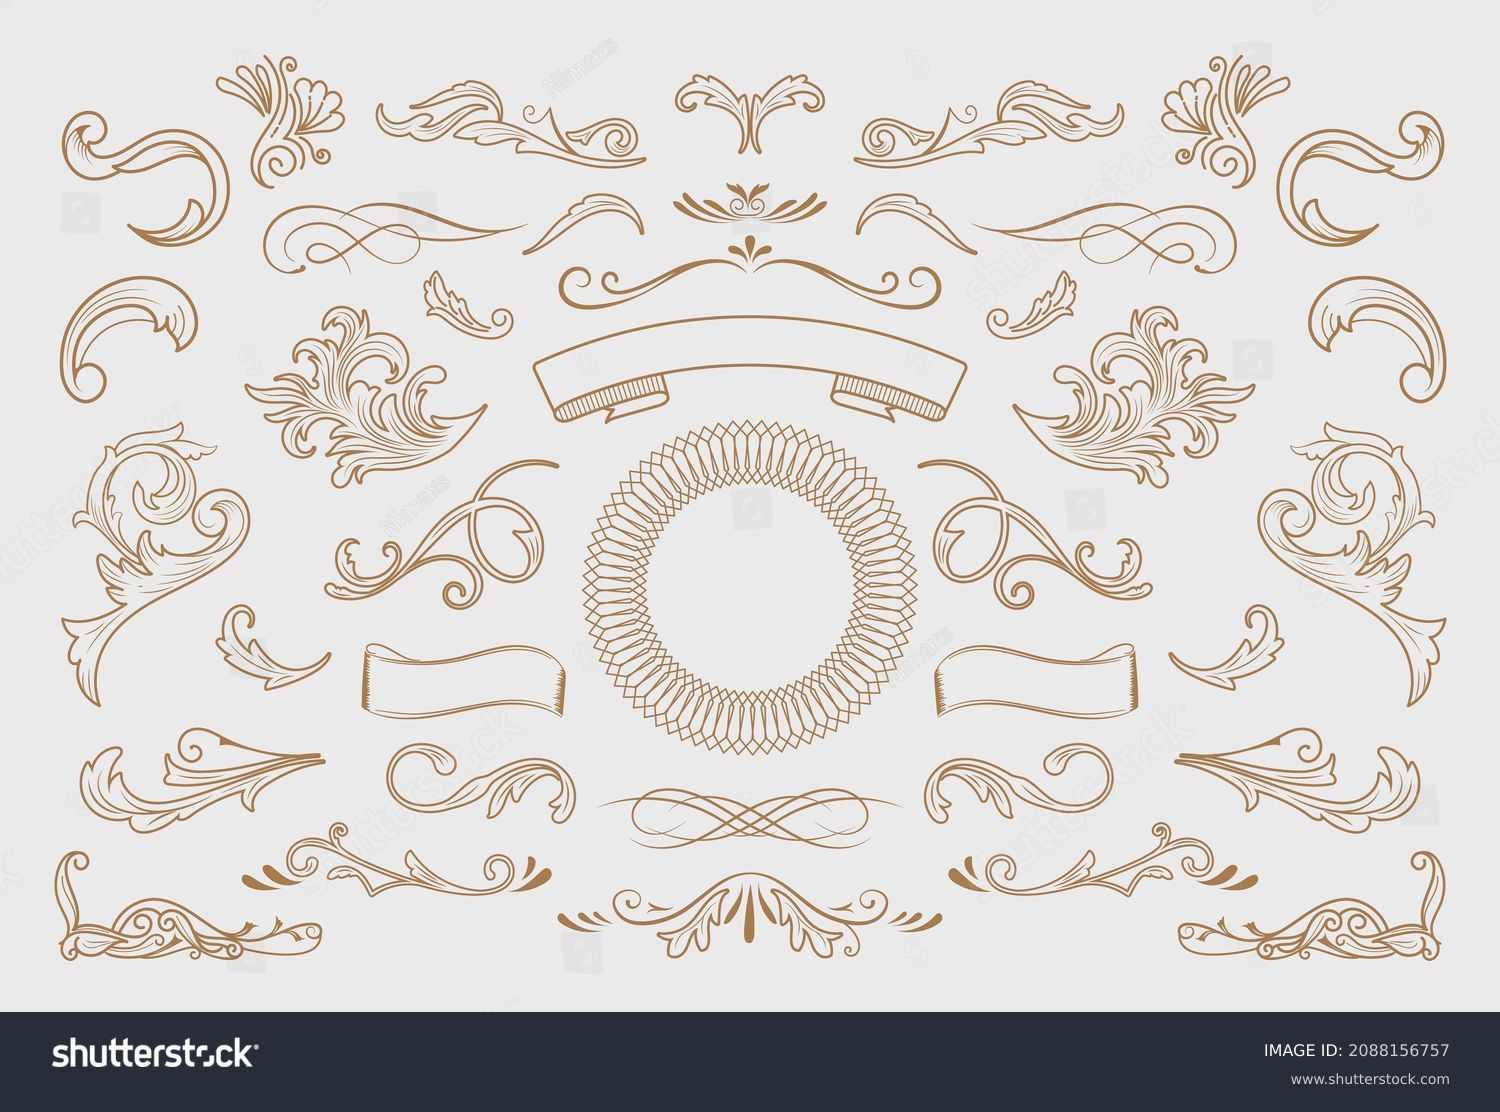 vintage flourish ornaments frame swirls and scrolls decorations retro design vector frames and invitations, greeting cards, certificates borders #2088156757